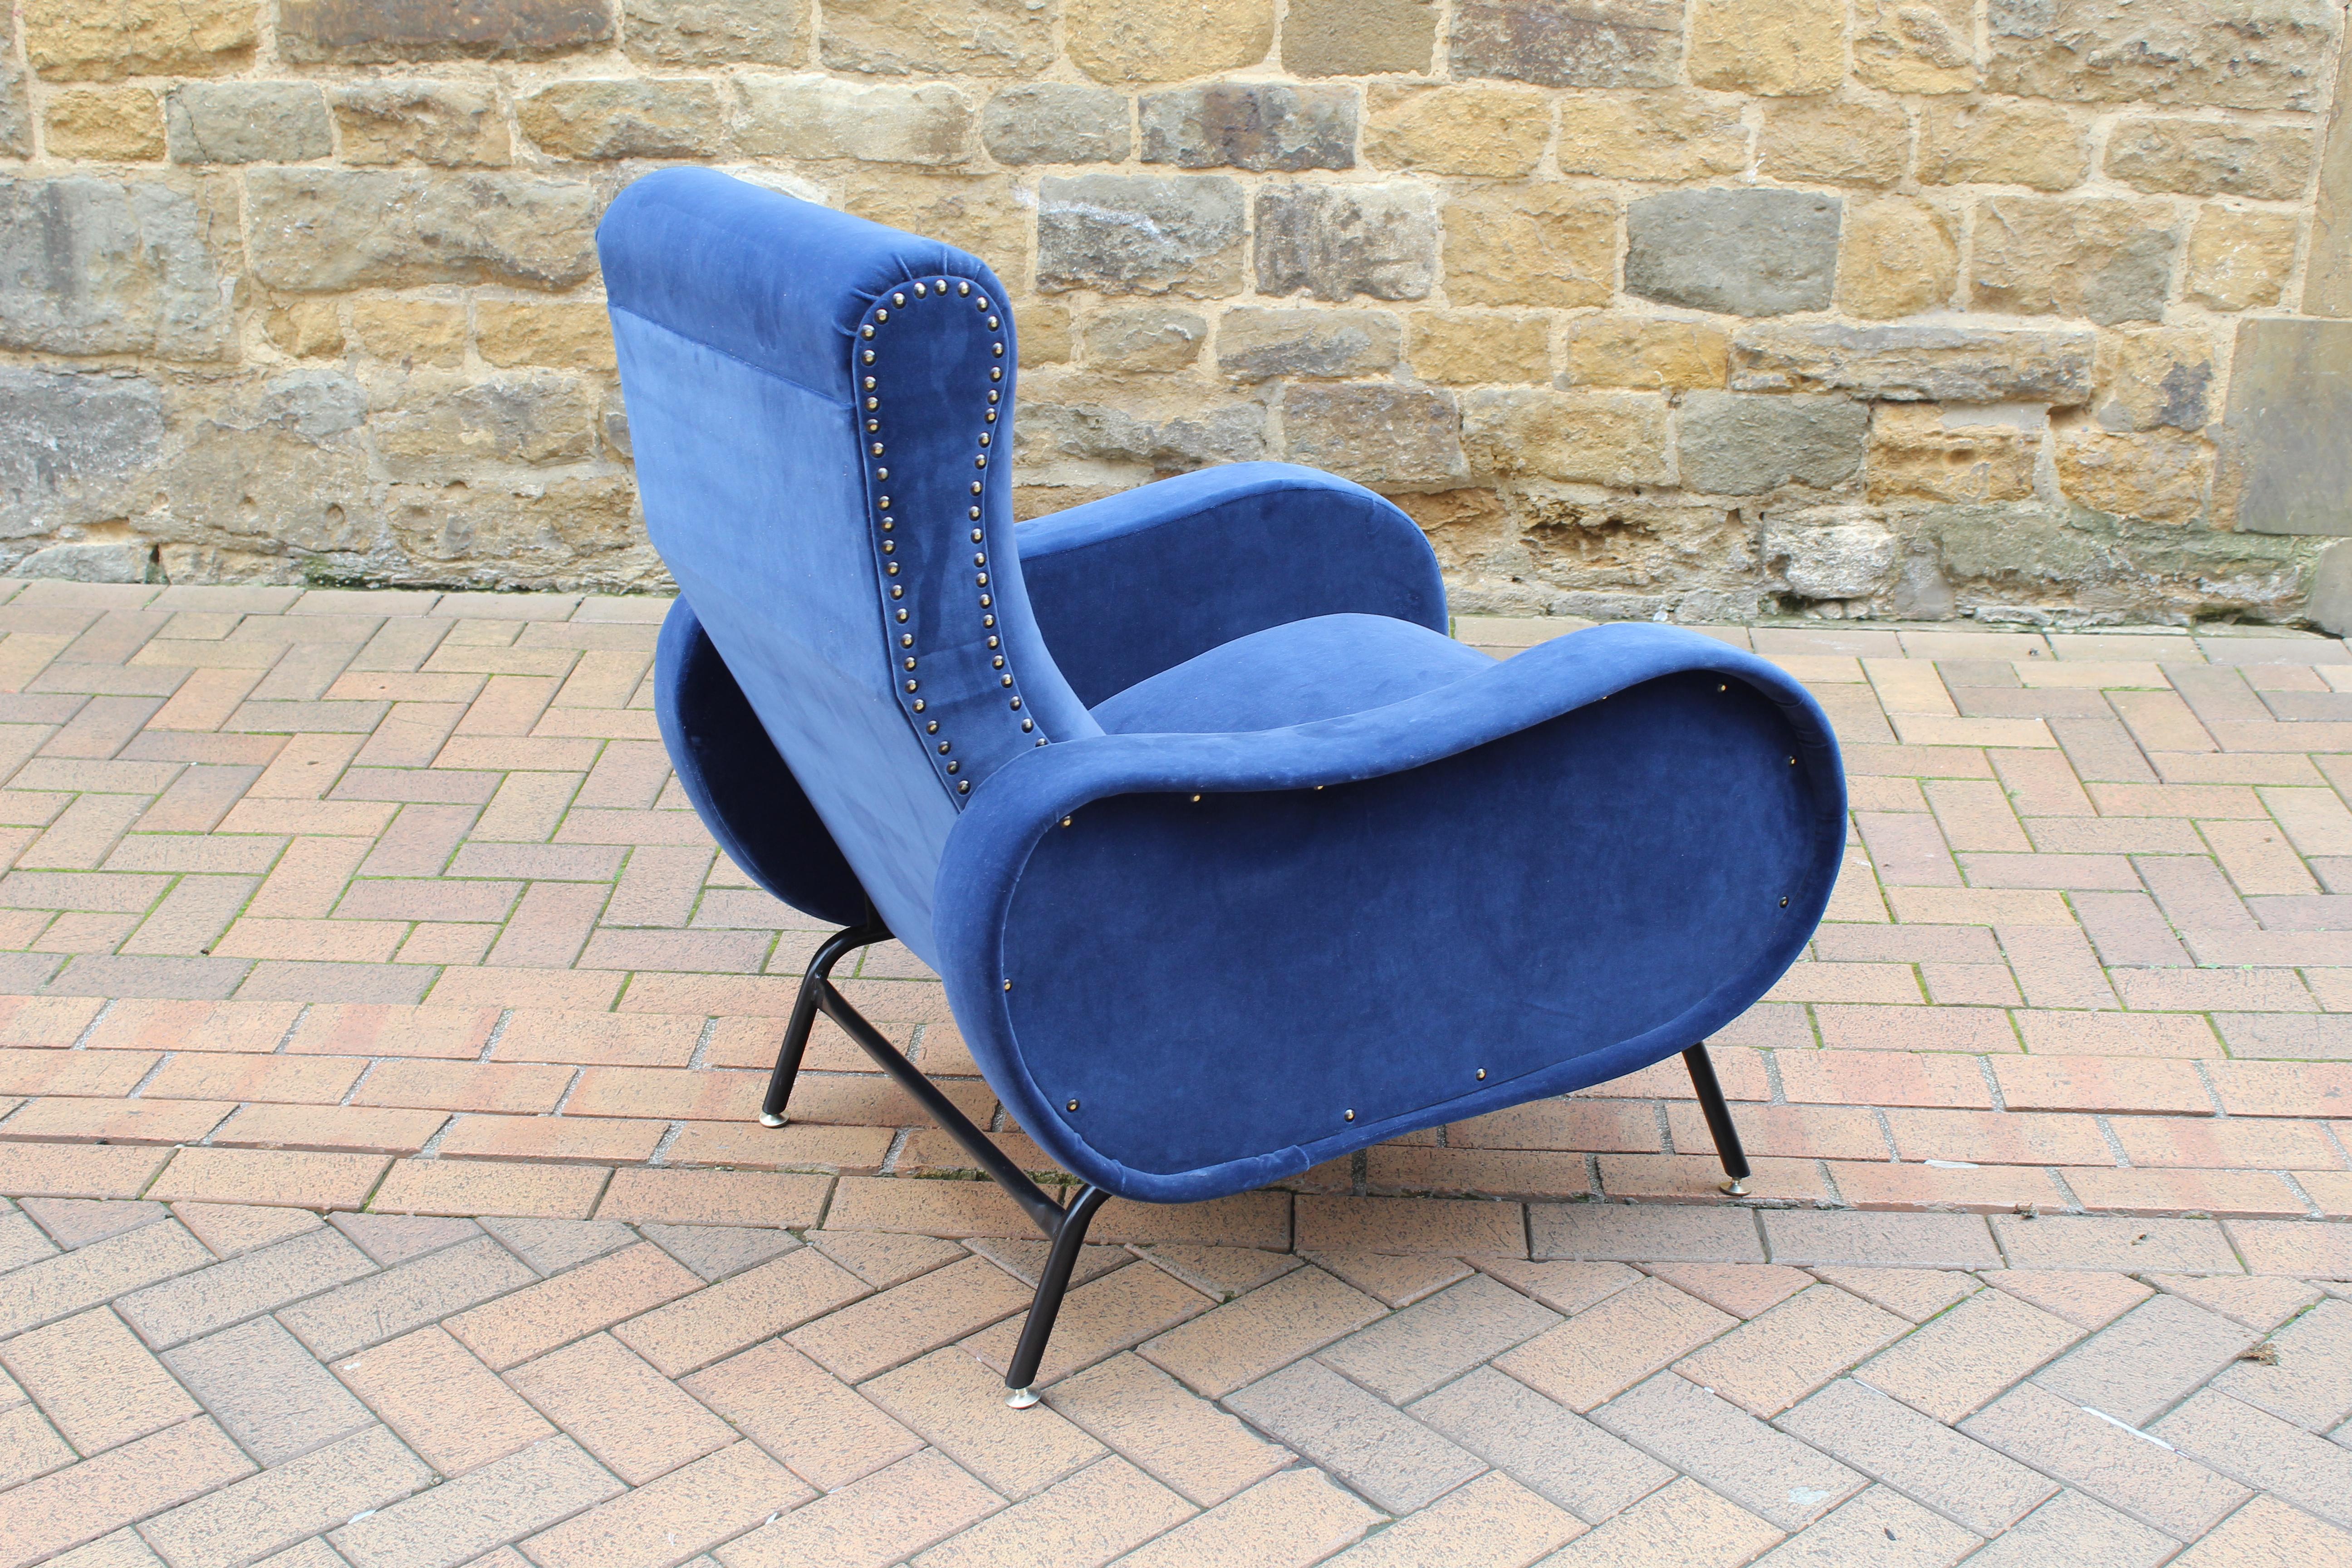 A beautiful 1950s Italian reclining armchair attributed to Marco Zanuso in a high quality deep blue velvet upholstery.

The chair sits on metal legs and smoothly reclines when you lean back into the chair, one of the most comfortable chairs you